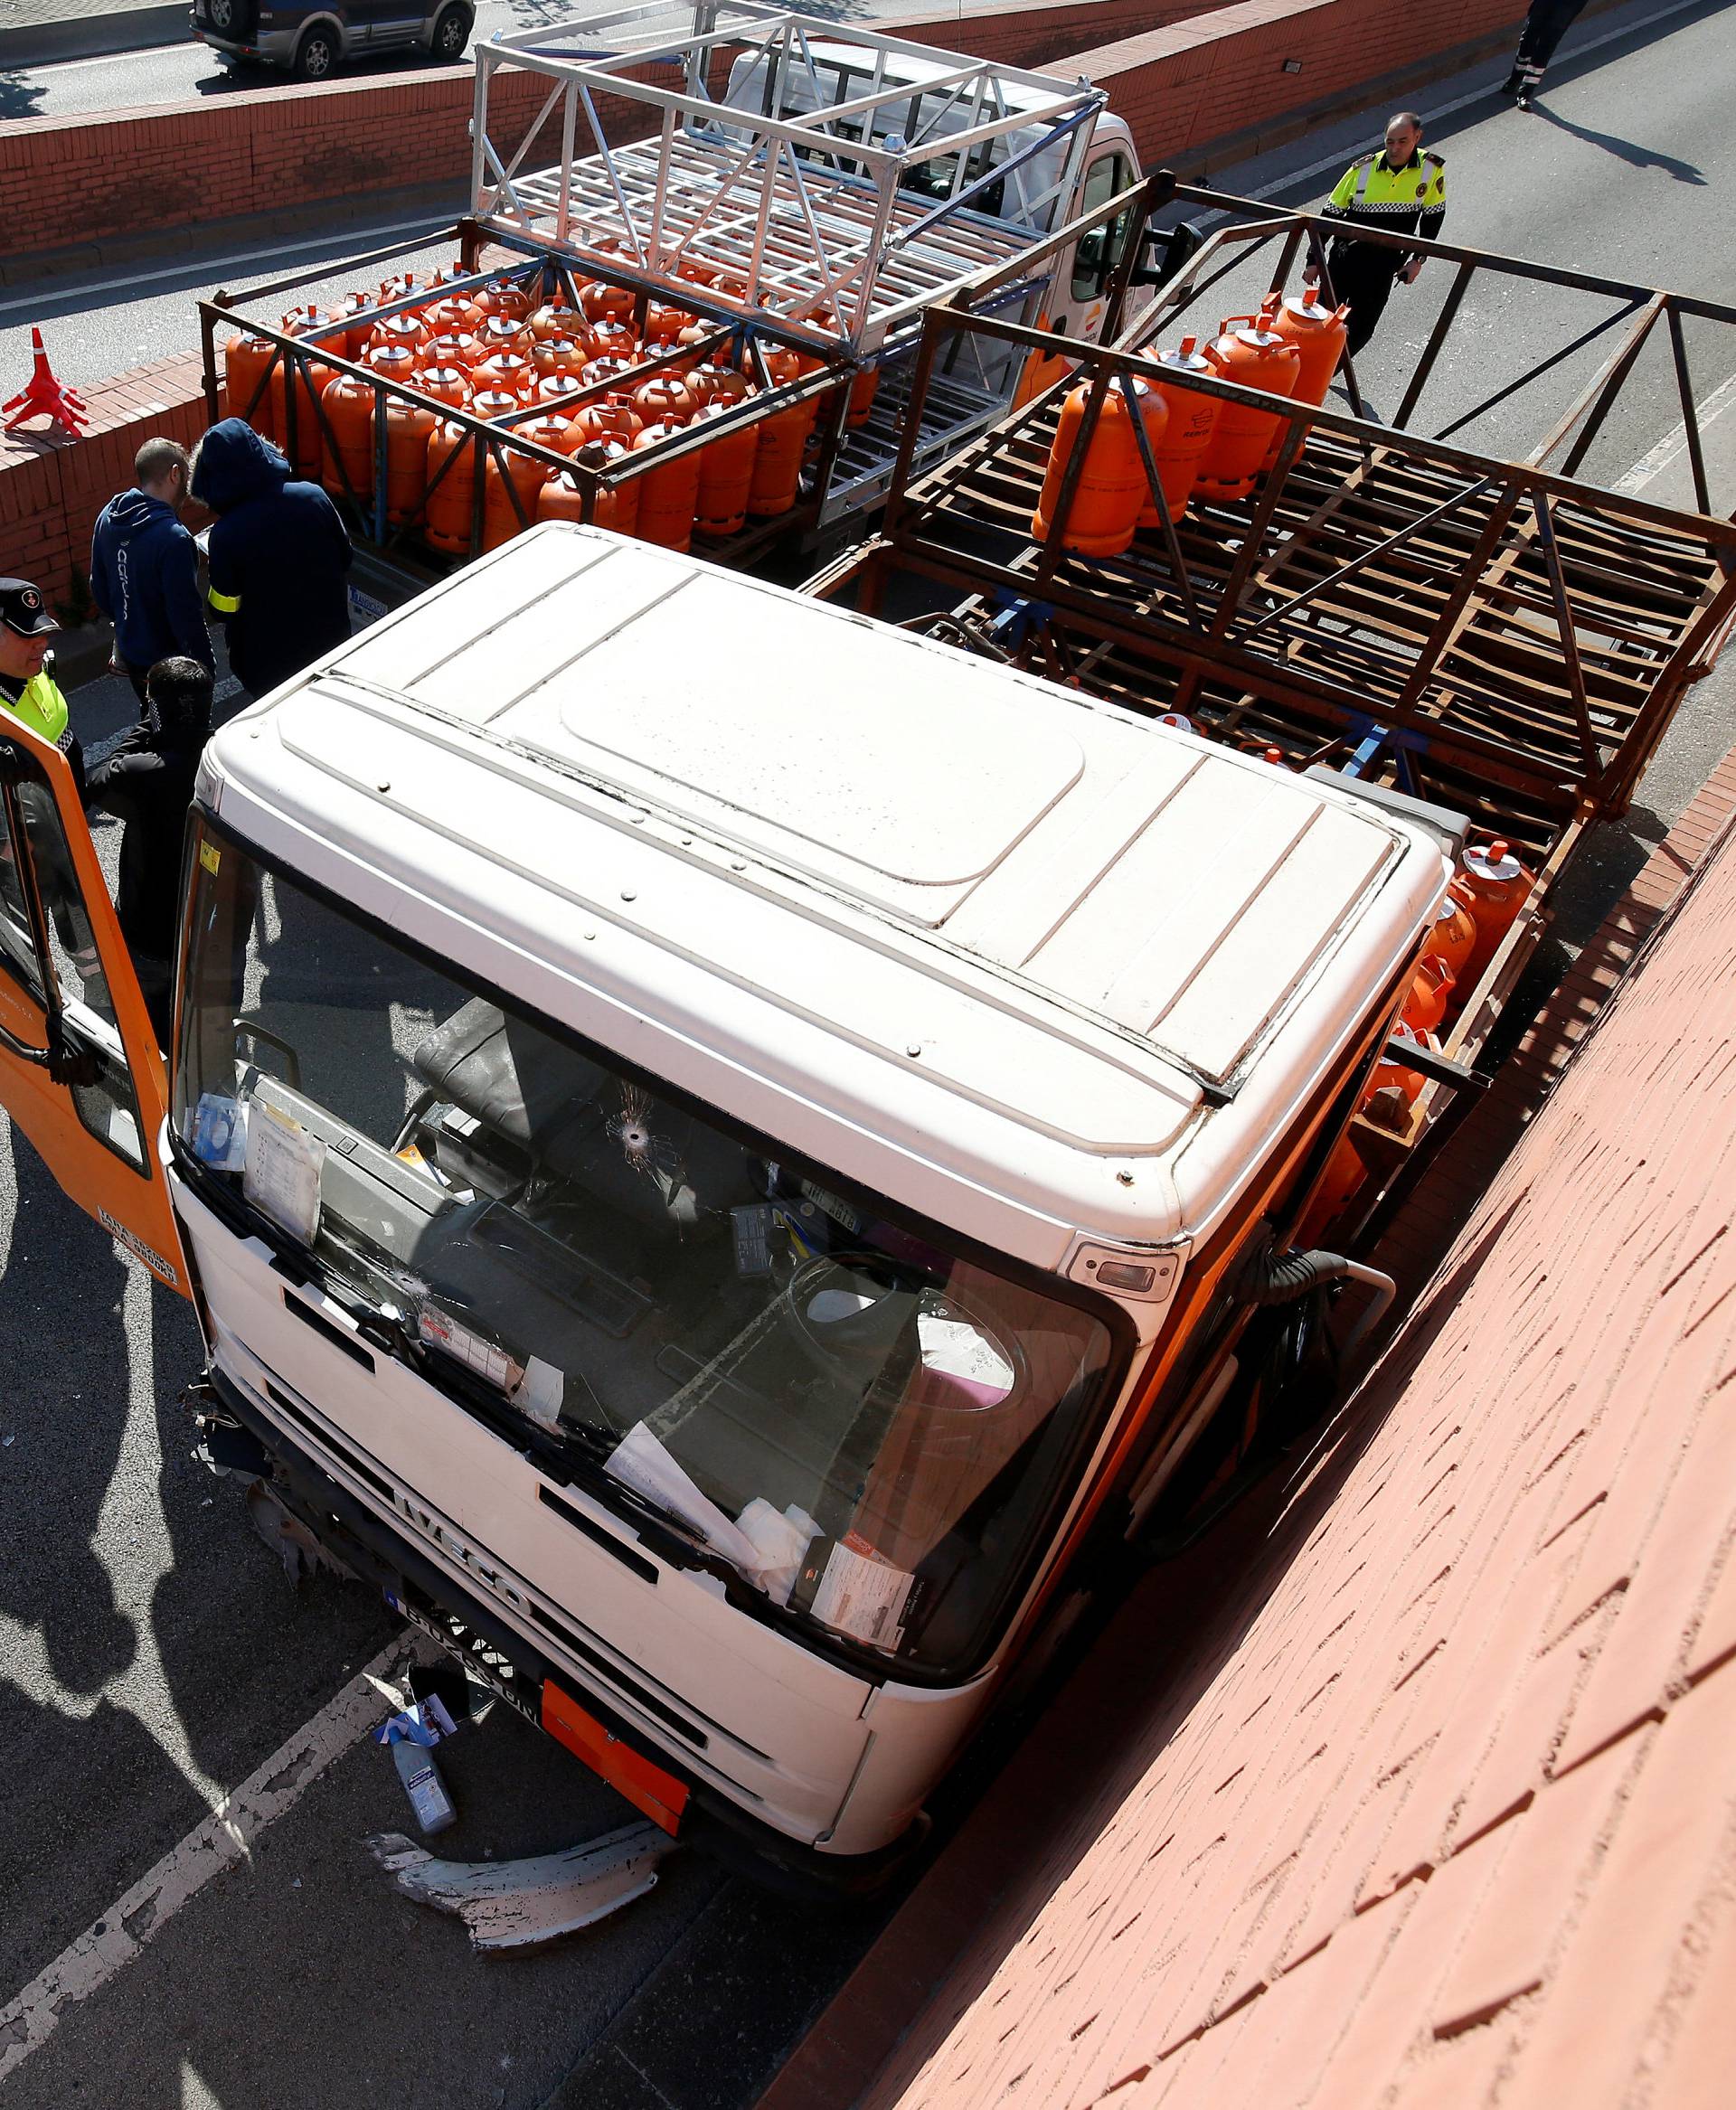 Police work at the scene of a gas cylinder delivery truck with bullet holes in its windscreen after police fired shots to stop the driver, whom they say had stolen the truck and was driving against traffic, in Barcelona, Spain